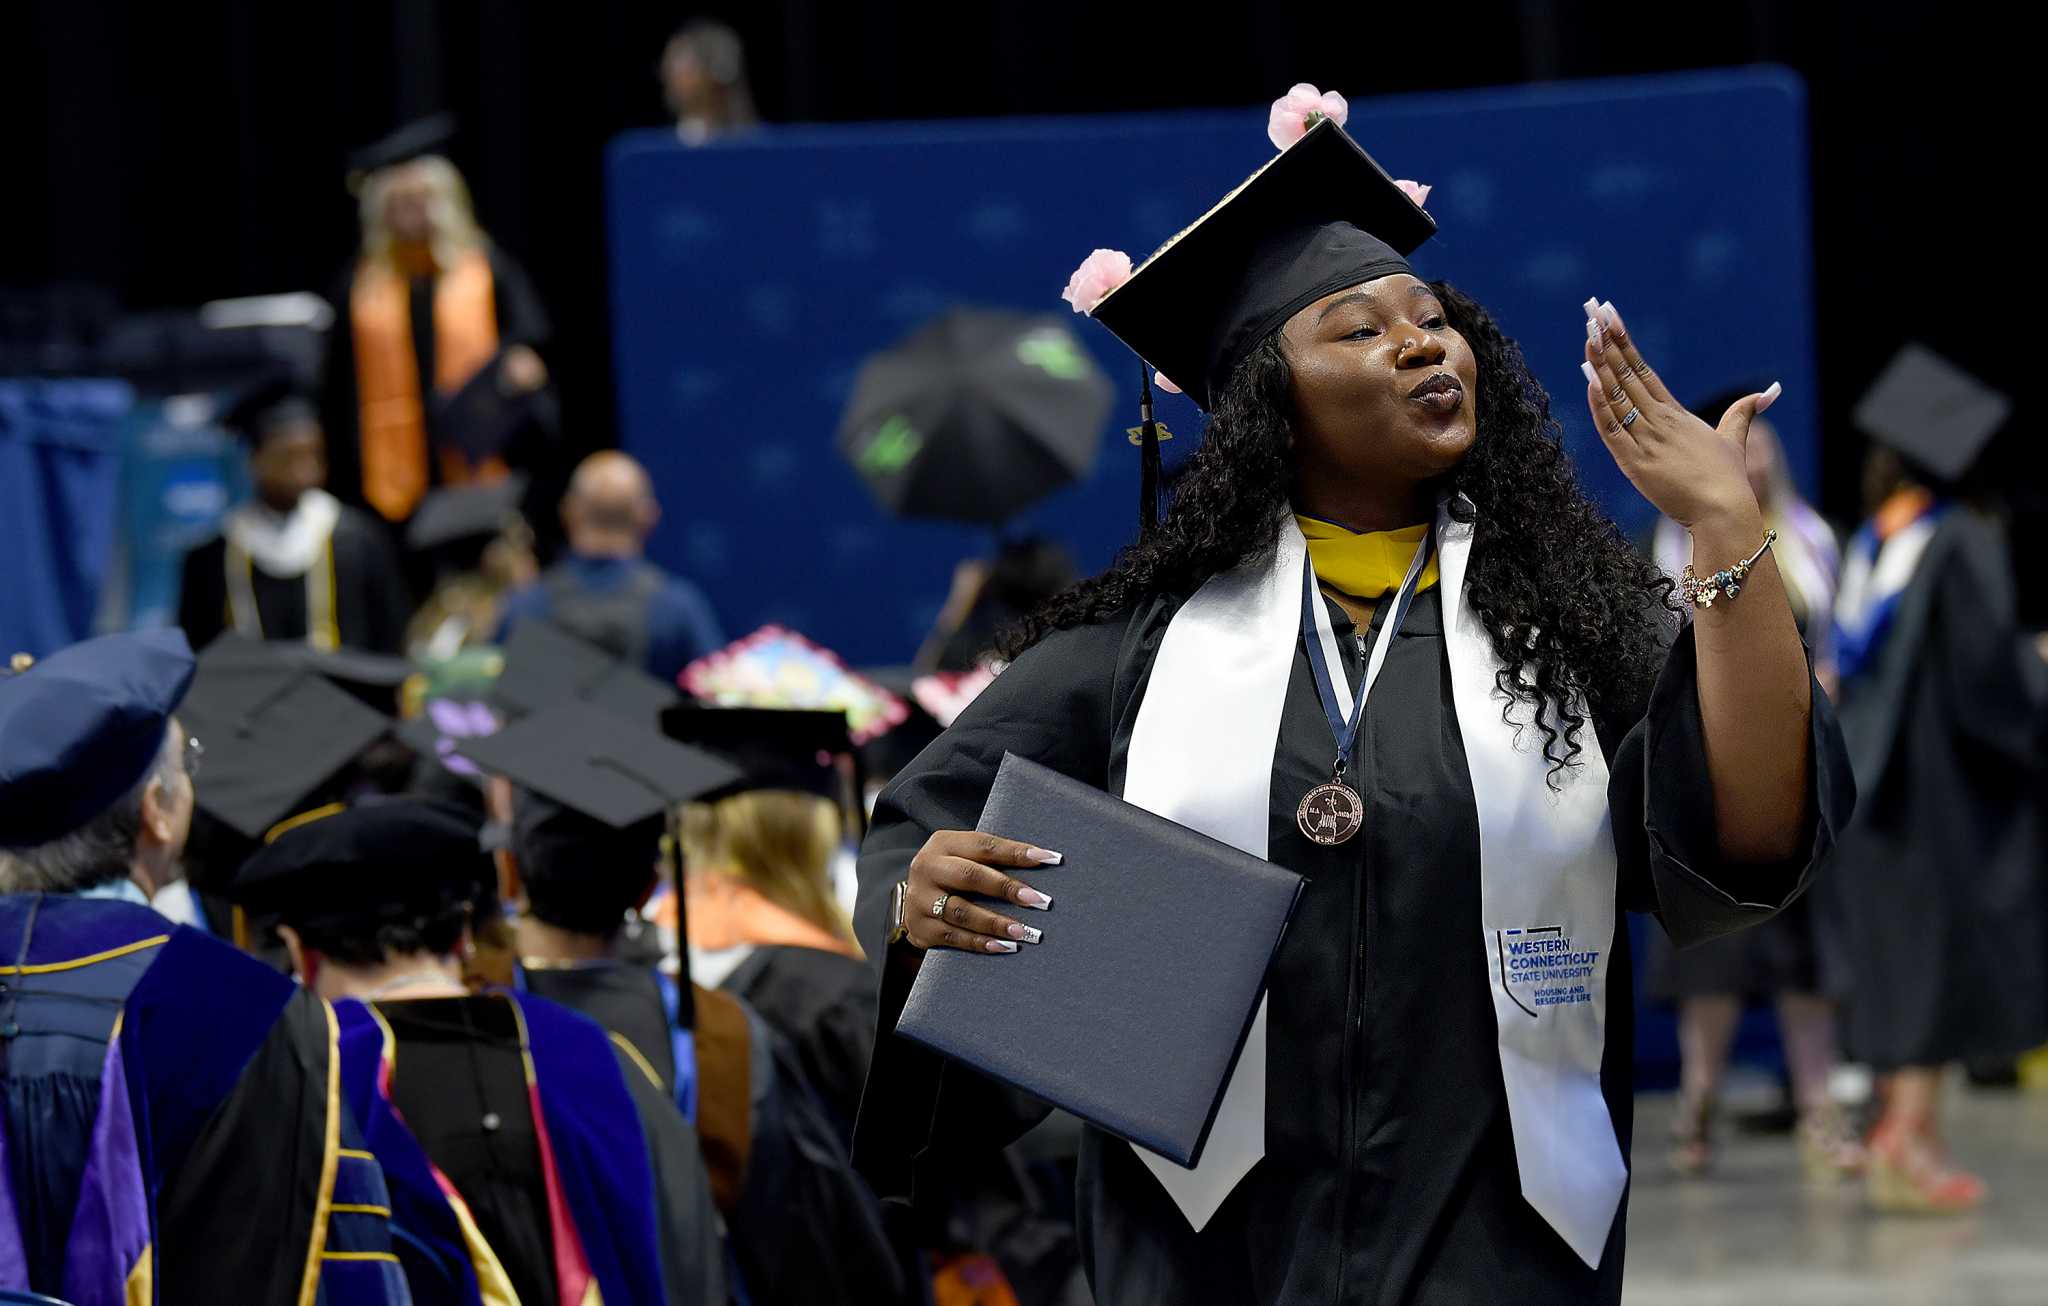 Danbury's Western CT State University marks 125th commencement